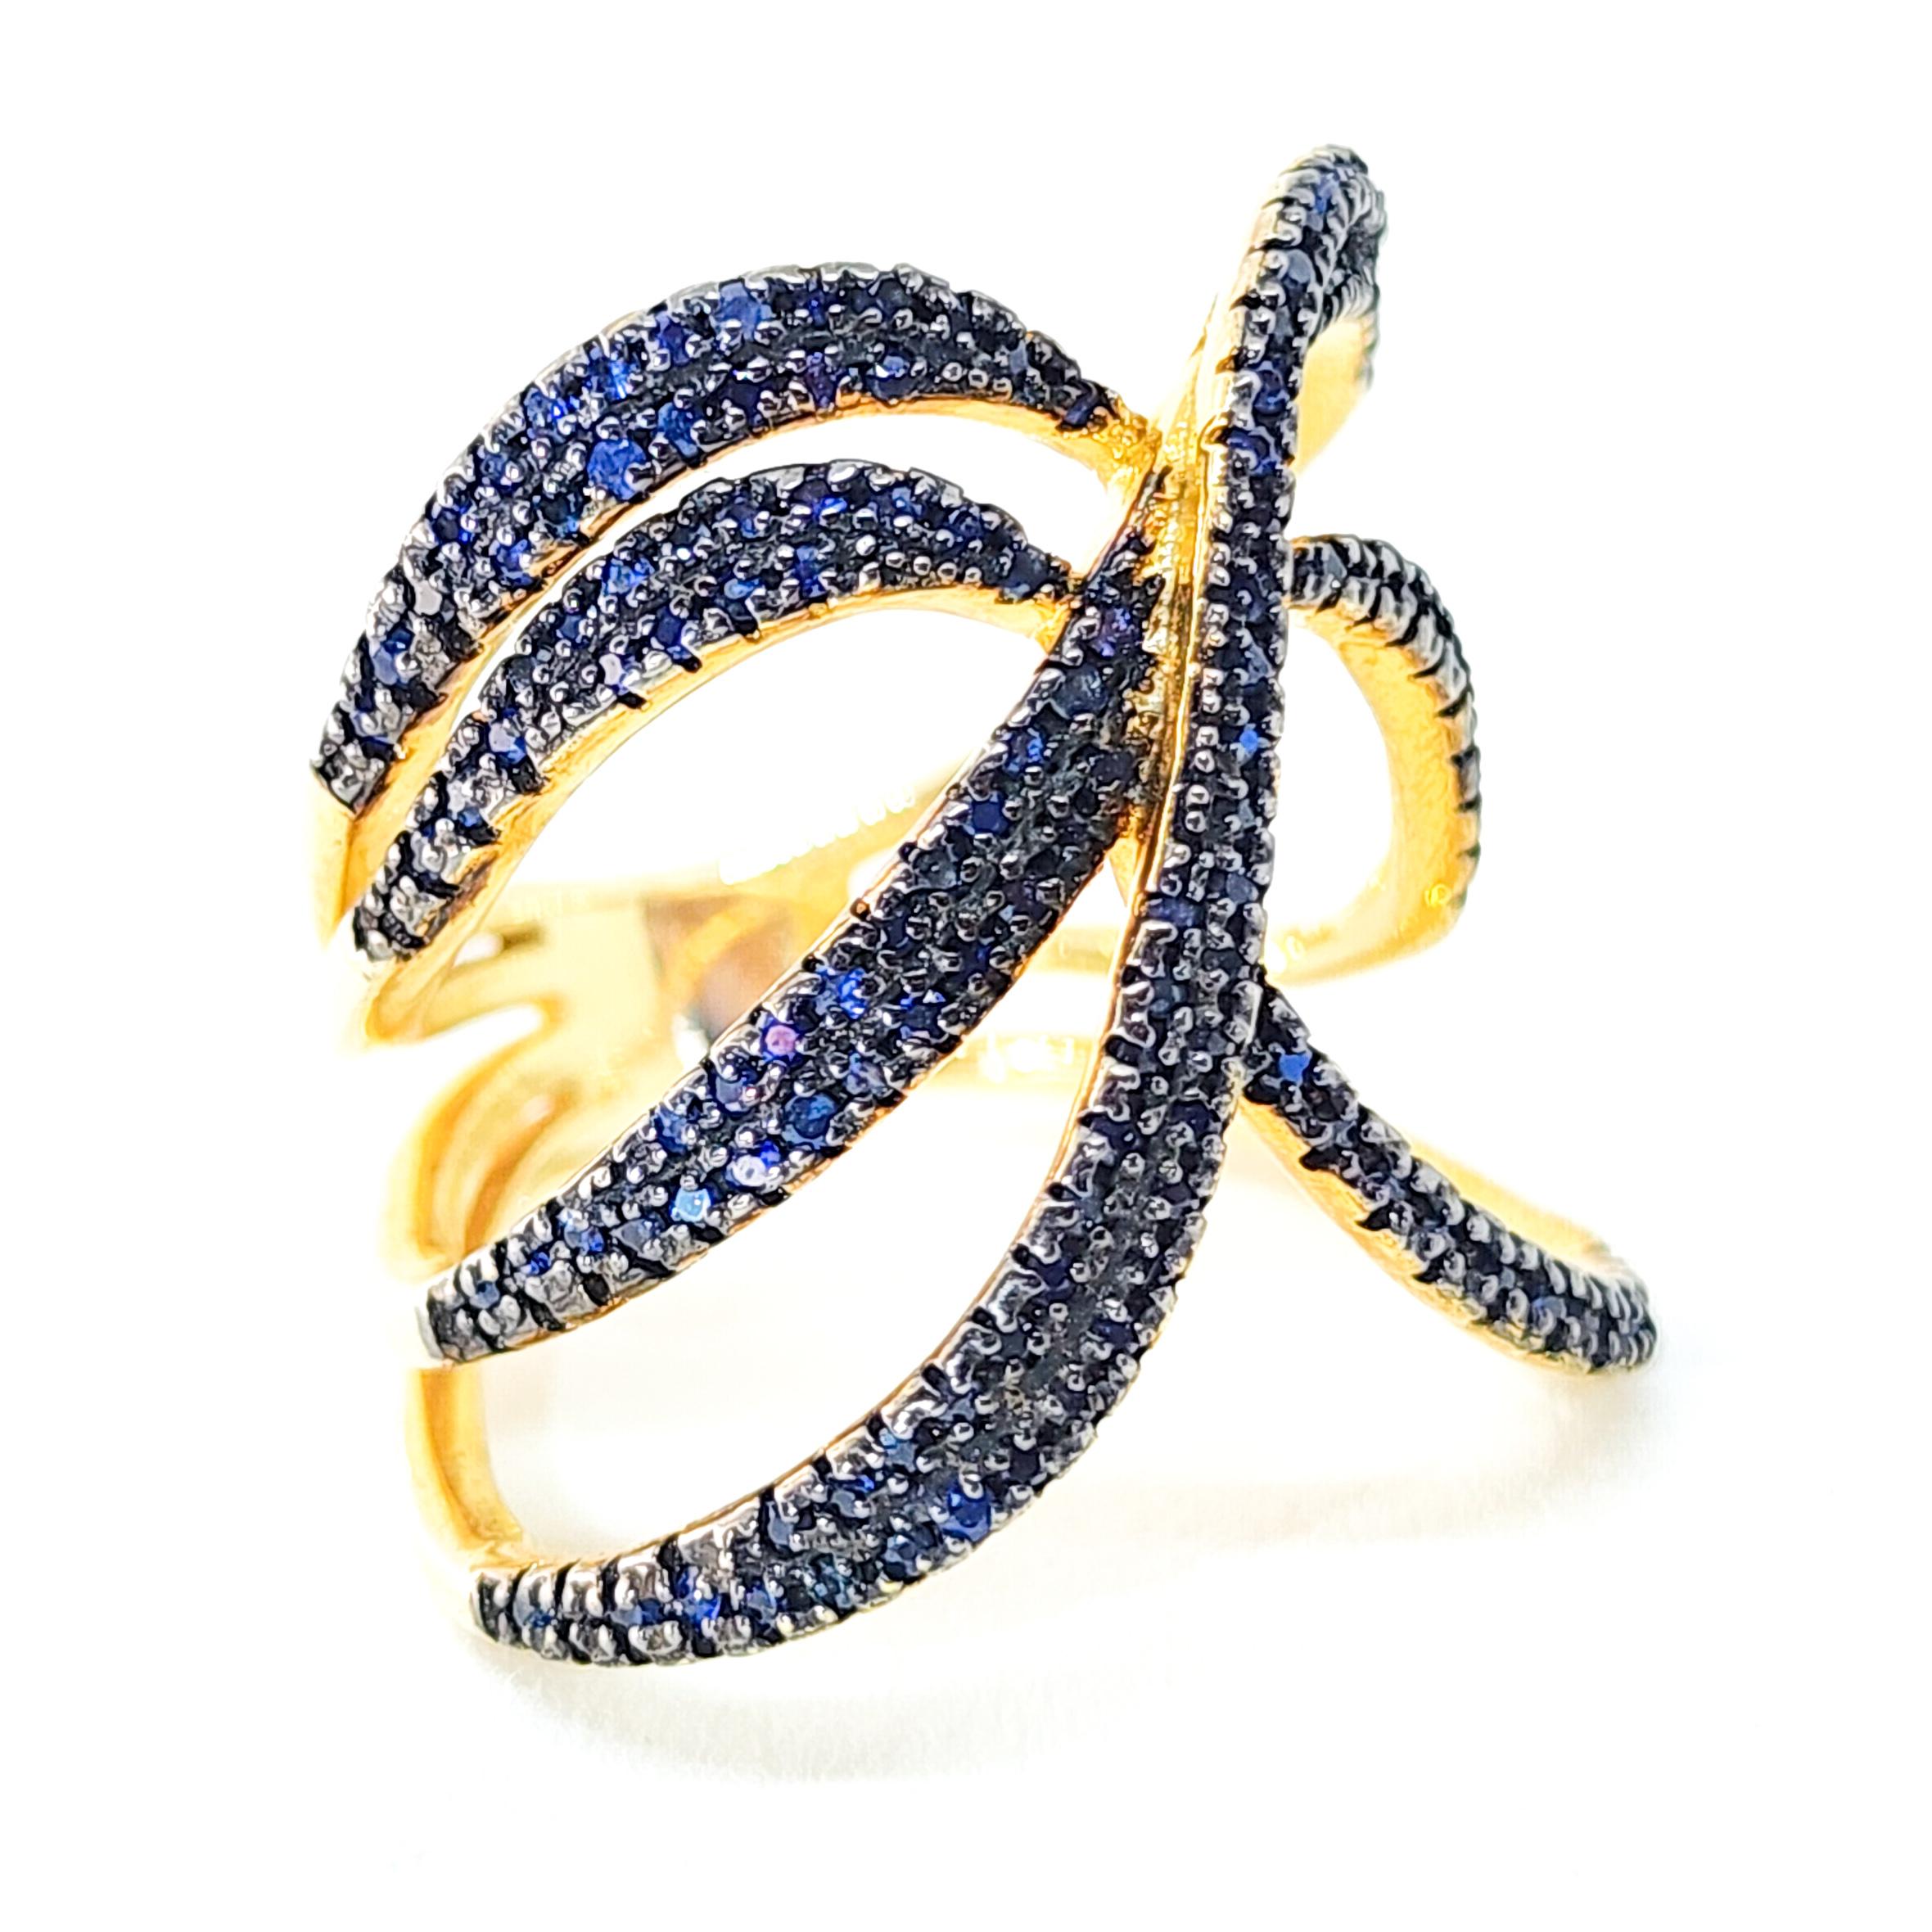 One Bypass, Wrap Around Style Cocktail, Band Ring featuring pave set Blue Sapphires. This festive Ring is an appropriate accent for all seasons wear.  The multi shoulder Ring is a wrap around style Bypass set with 0.95ct of faceted, round Blue